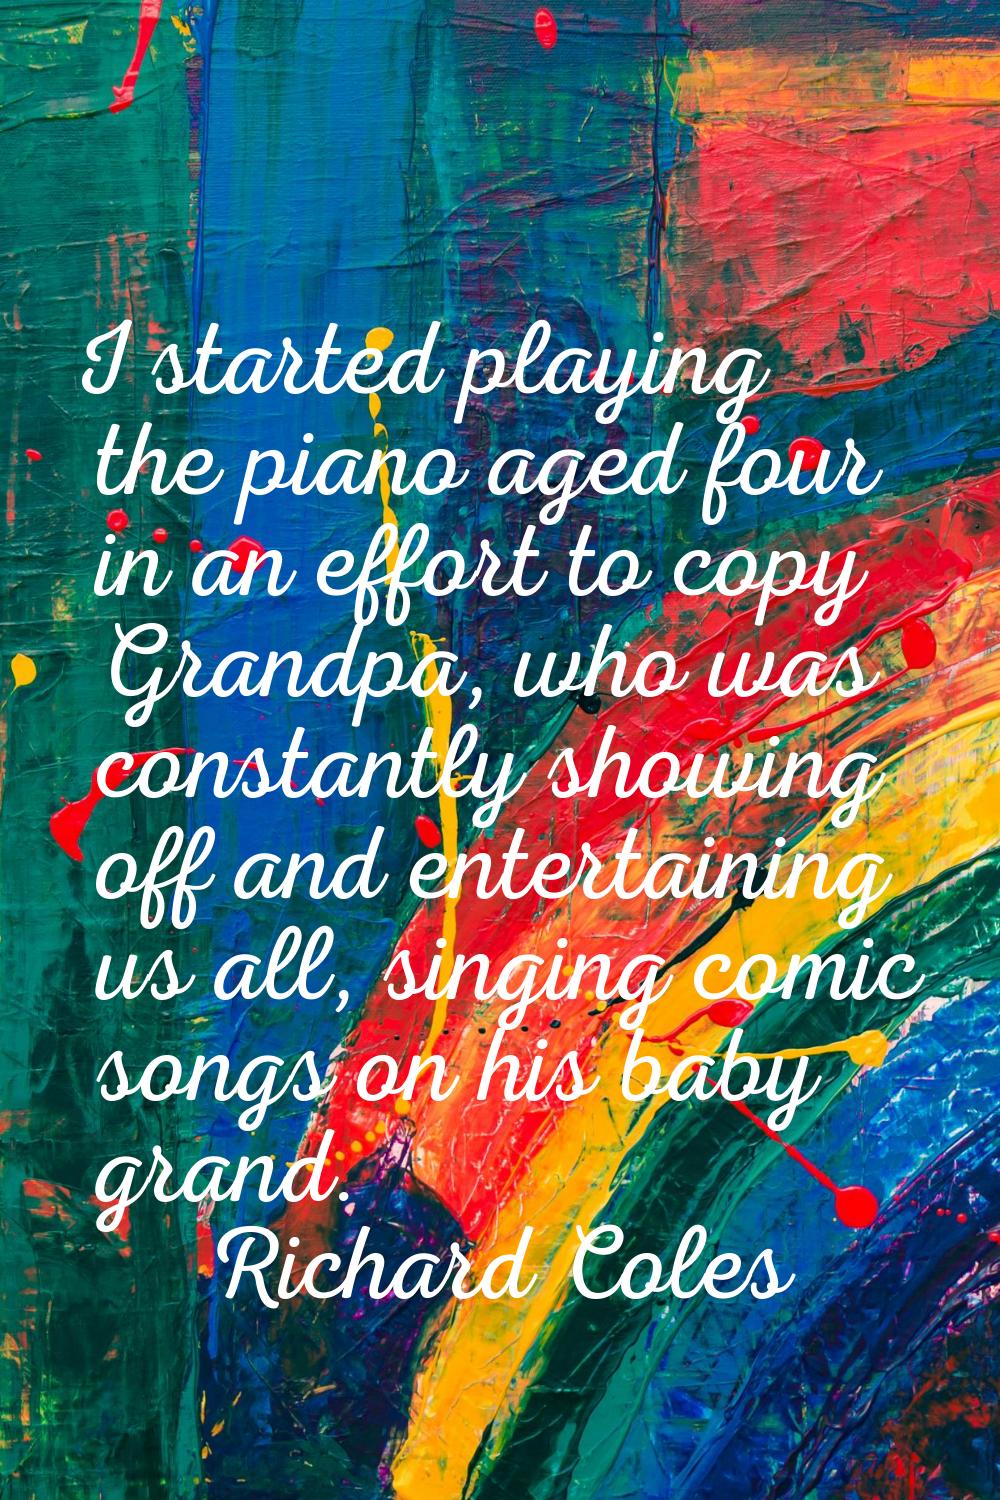 I started playing the piano aged four in an effort to copy Grandpa, who was constantly showing off 